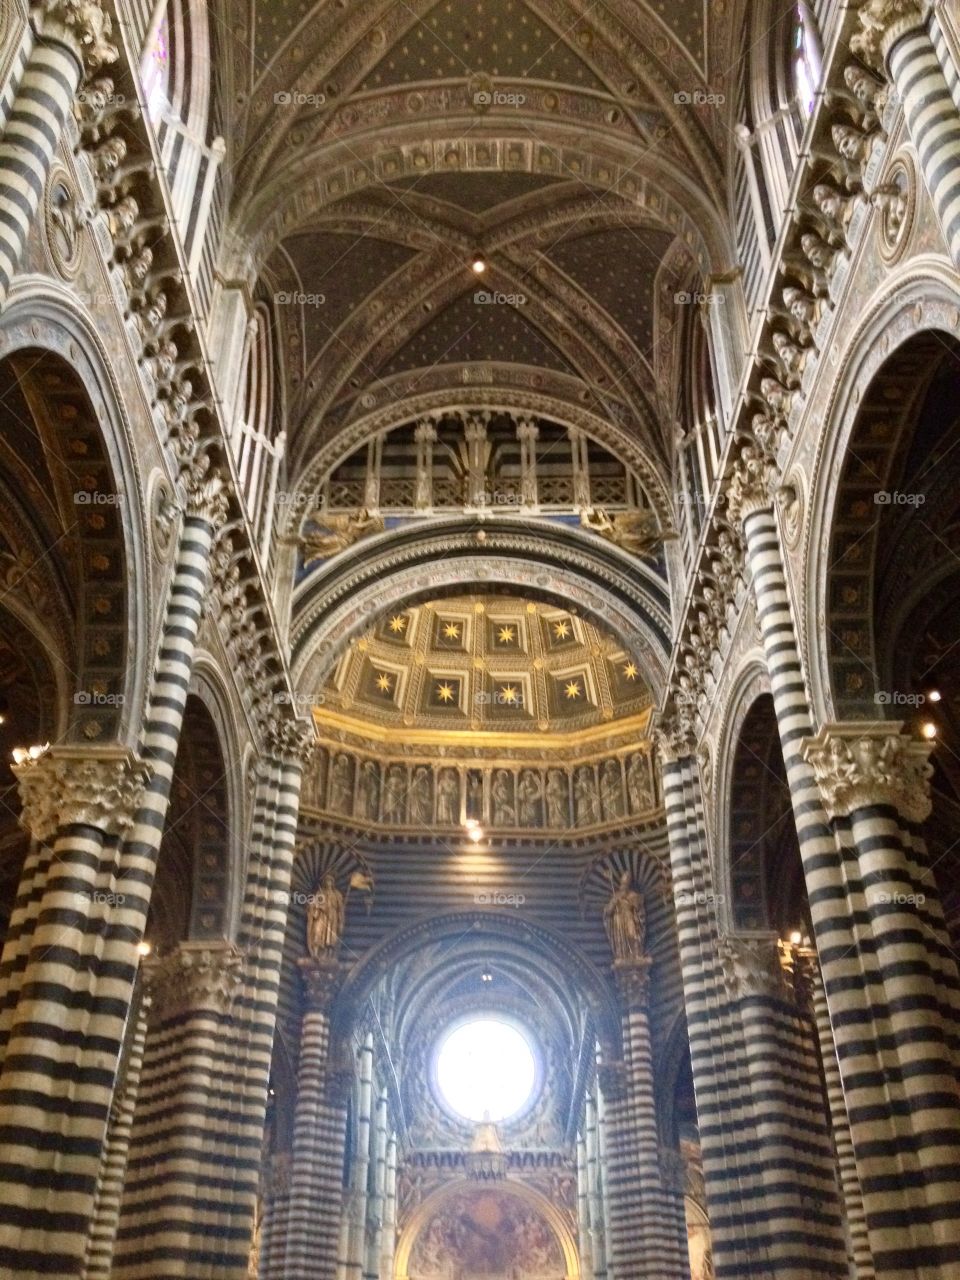 The nave and dome of Siena Cathedral